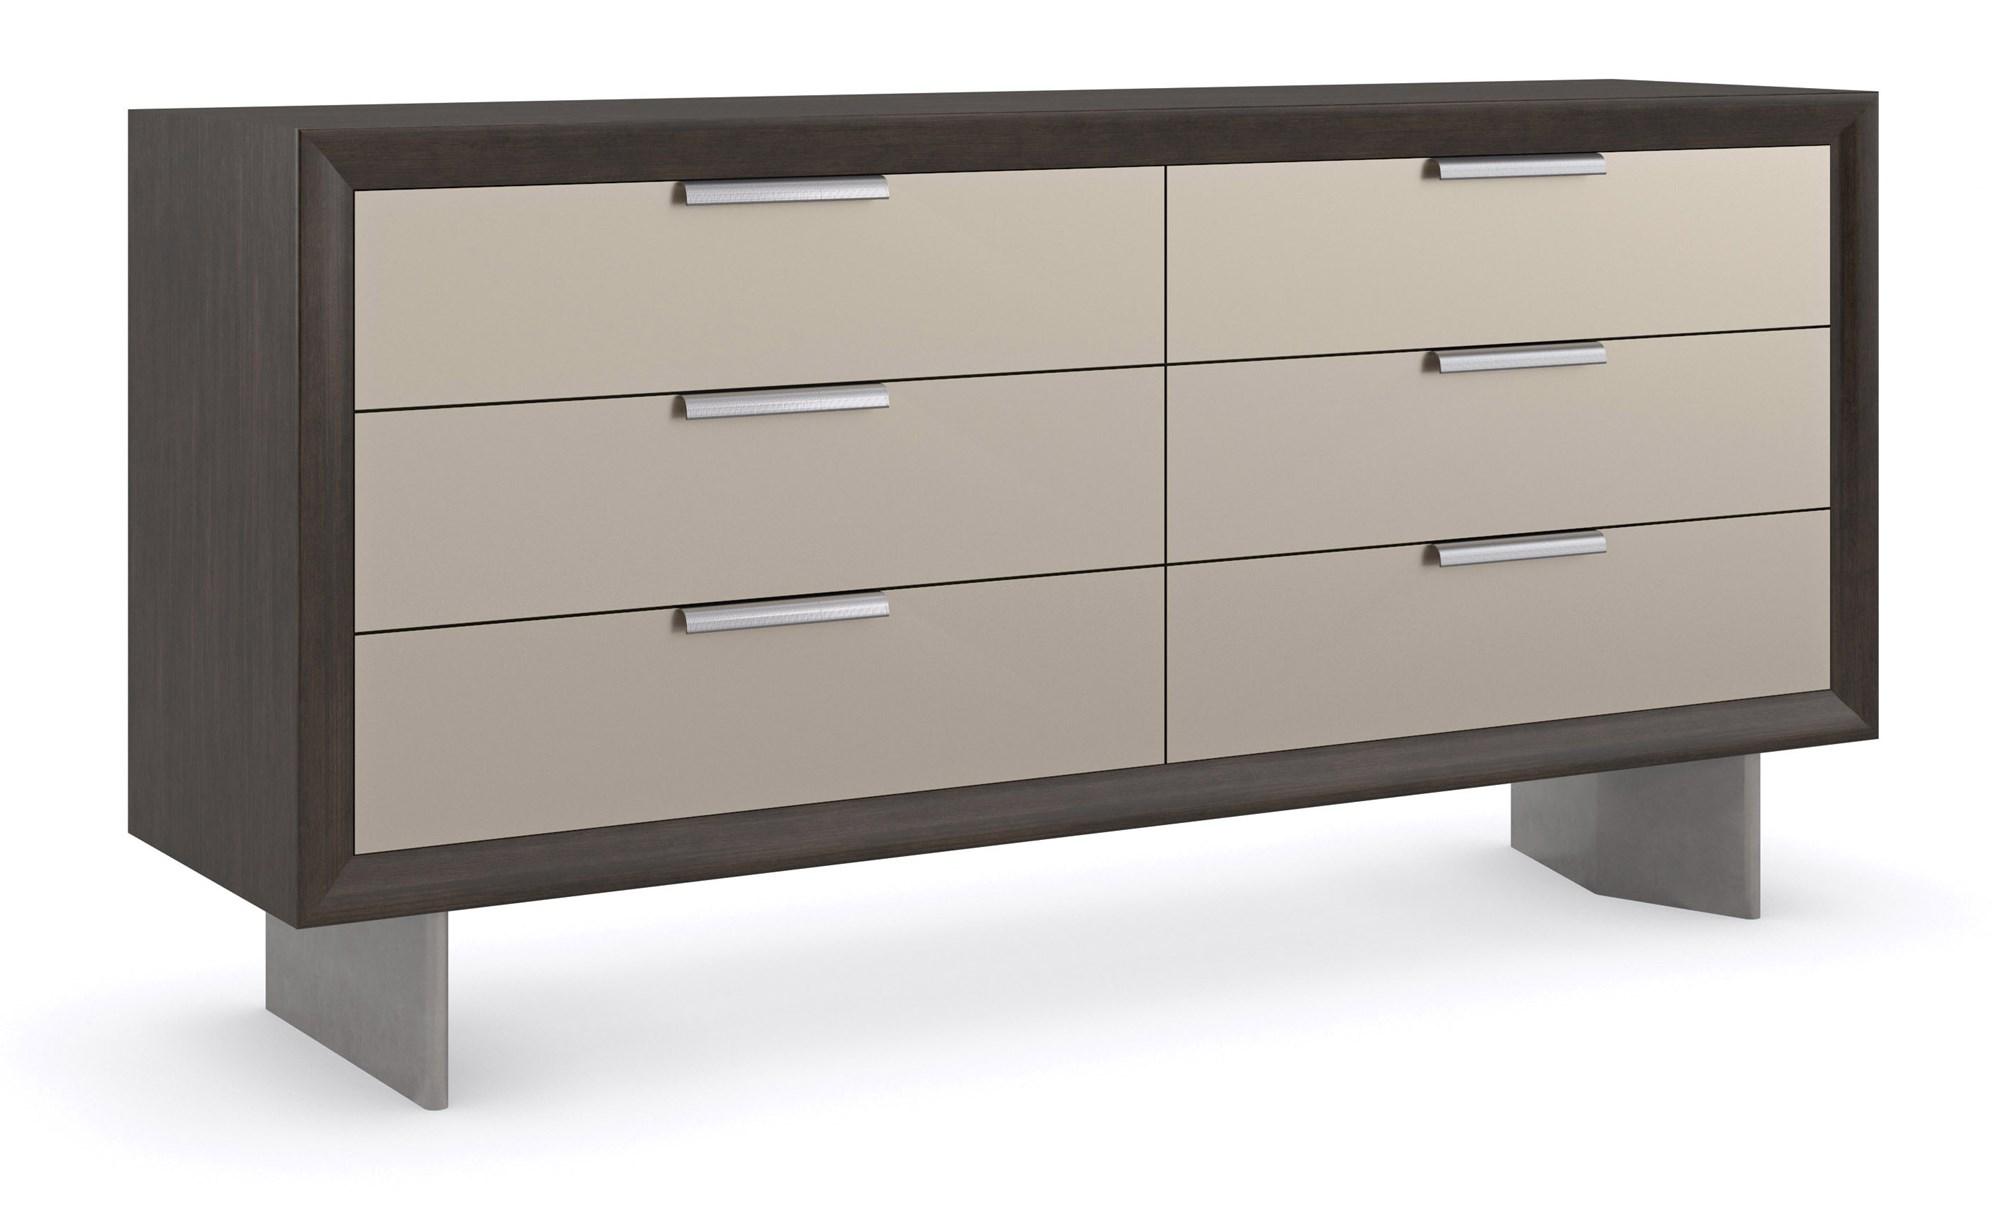 

    
Sepia & Smoked Stainless Steel Paint Finish LA MODA DRESSER by Caracole
